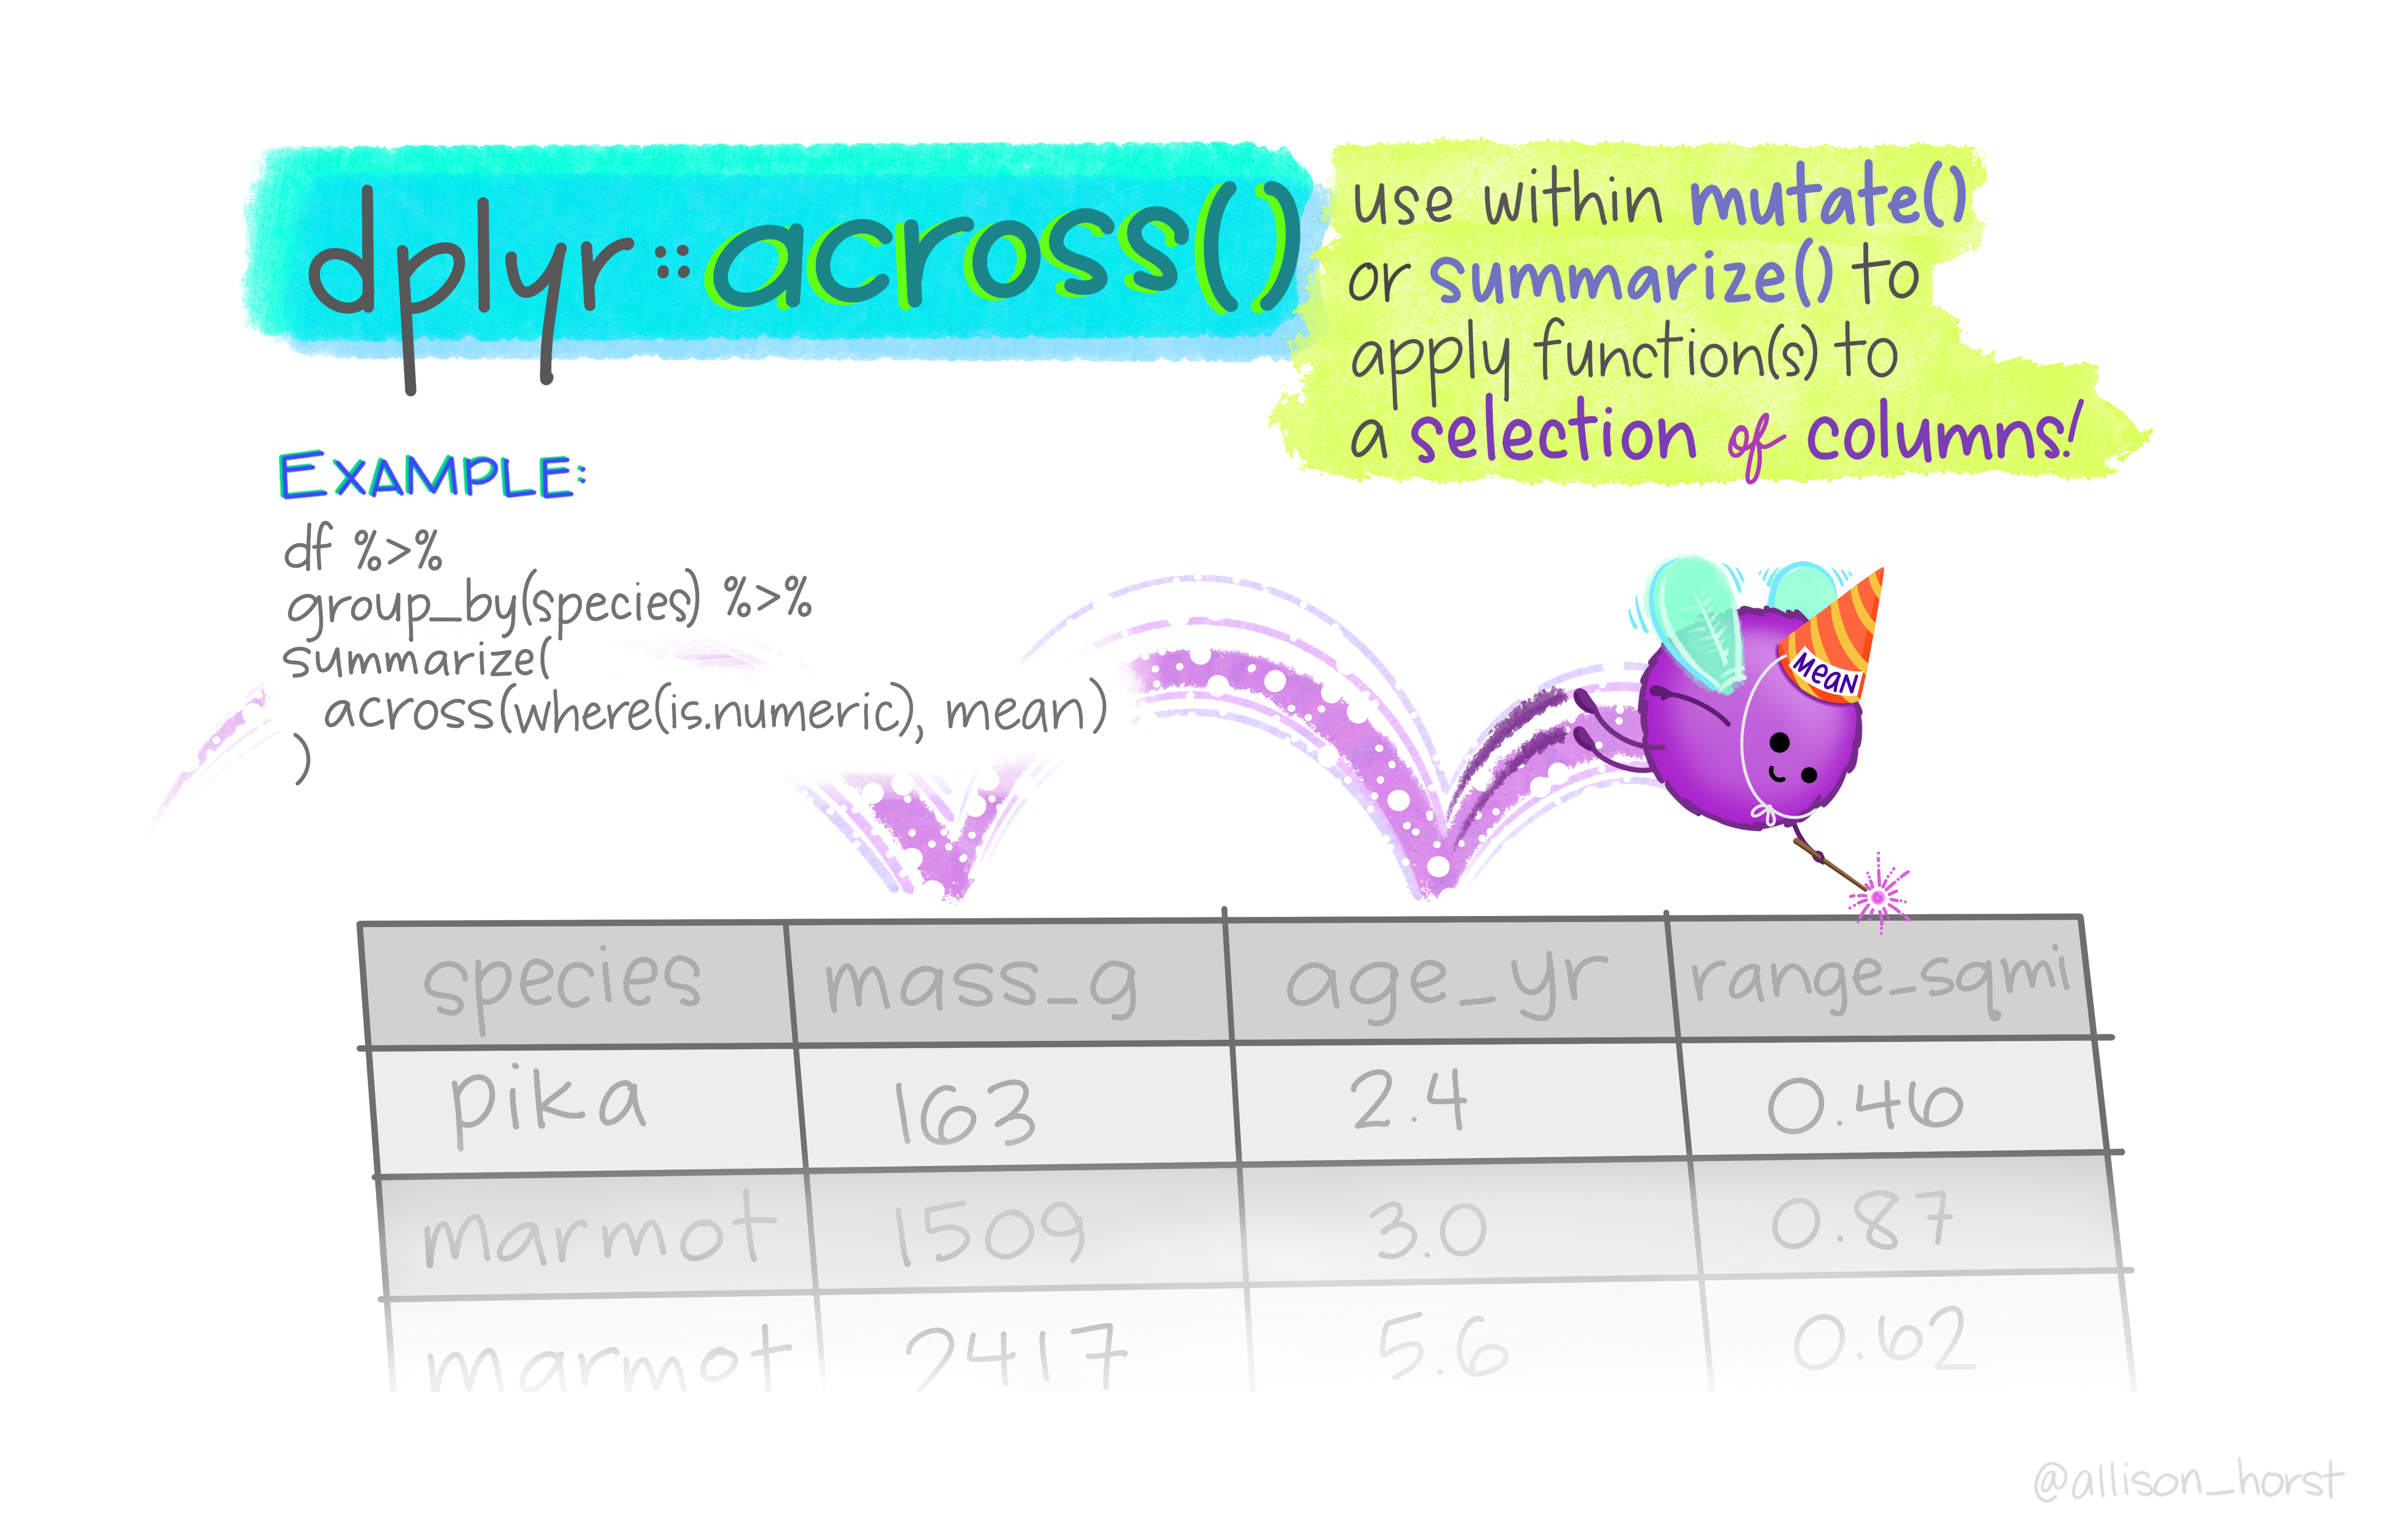 A cute round fuzzy monster with fairy wings and a wand, with a party hat on reading “mean”, bouncing across the top of a data table applying the function to each column. Stylized text reads: “dplyr::across() - use within mutate() or summarize() to apply function(s) to a selection of columns!” An example shows the use within summarize: summarize(across(where(is.numeric), mean)). Learn more about dplyr::across().